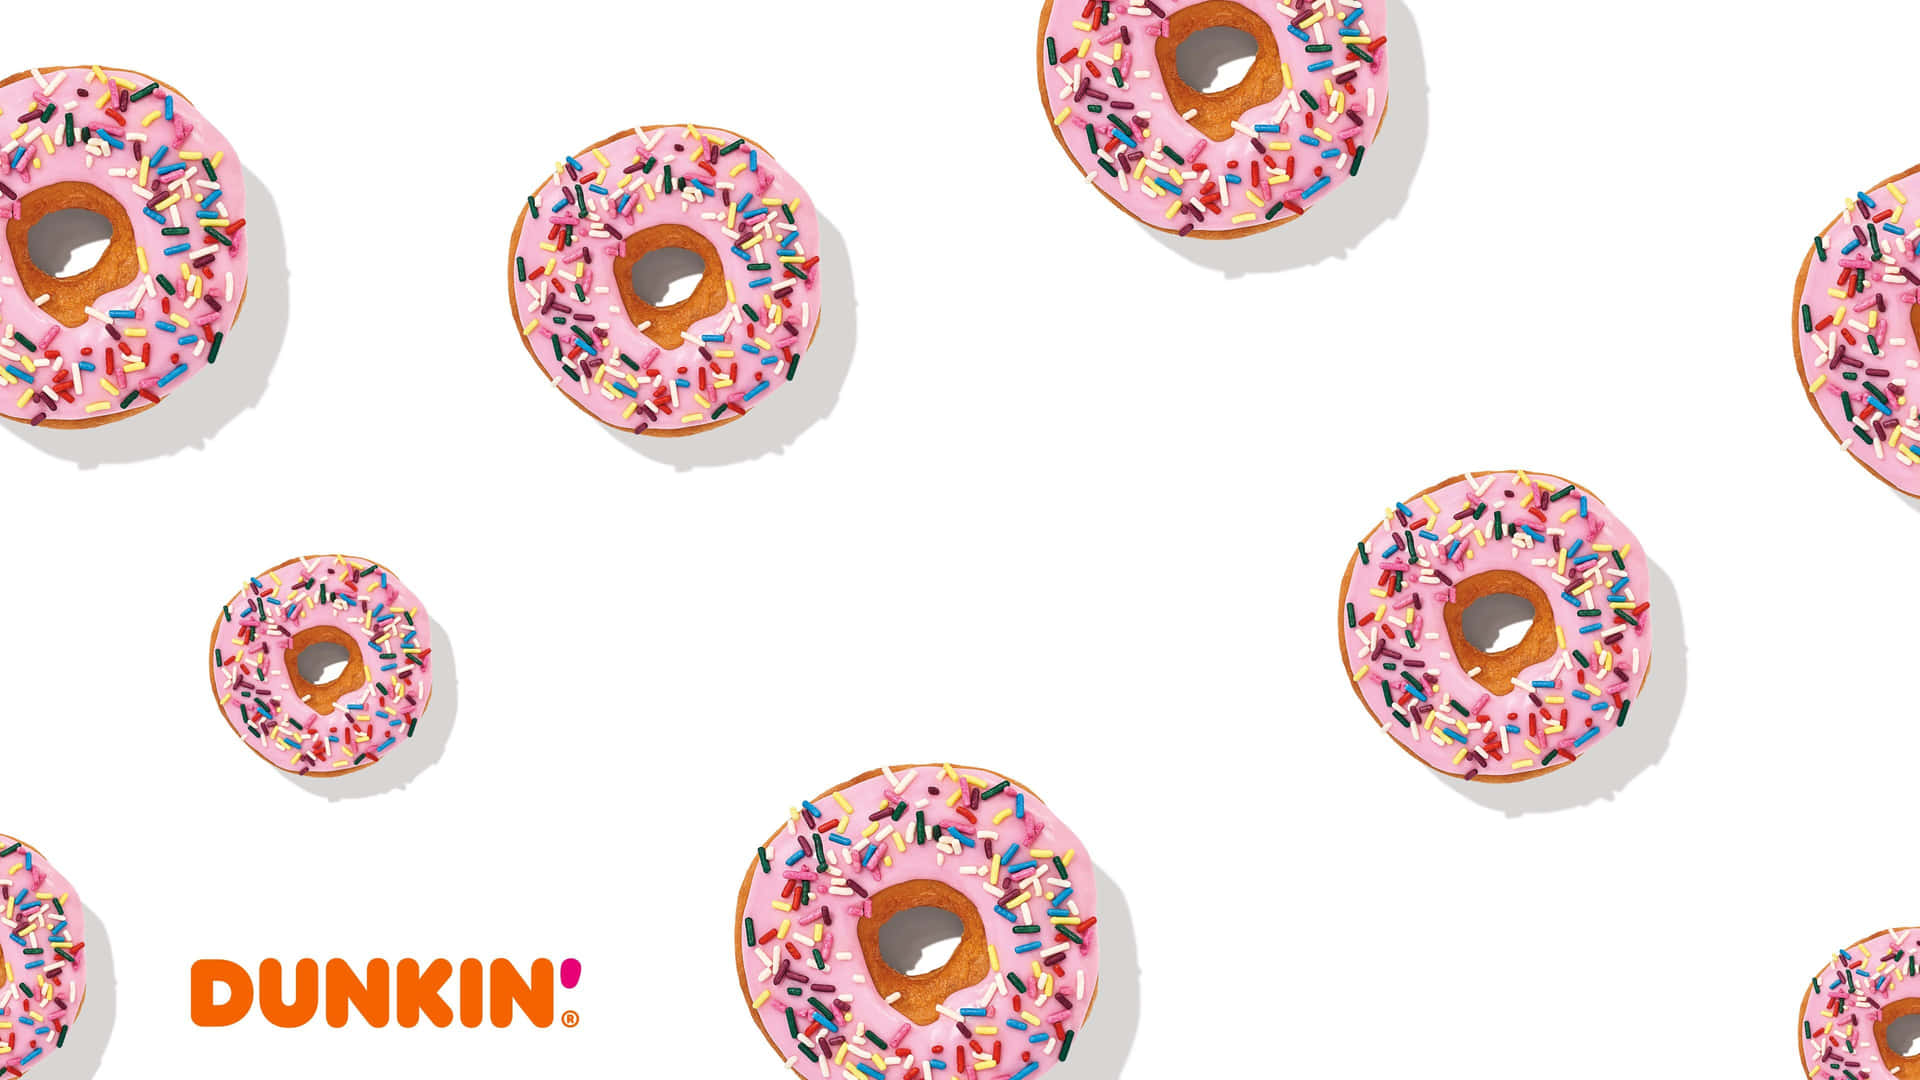 Enjoy delicious coffee and doughnuts from Dunkin Donuts